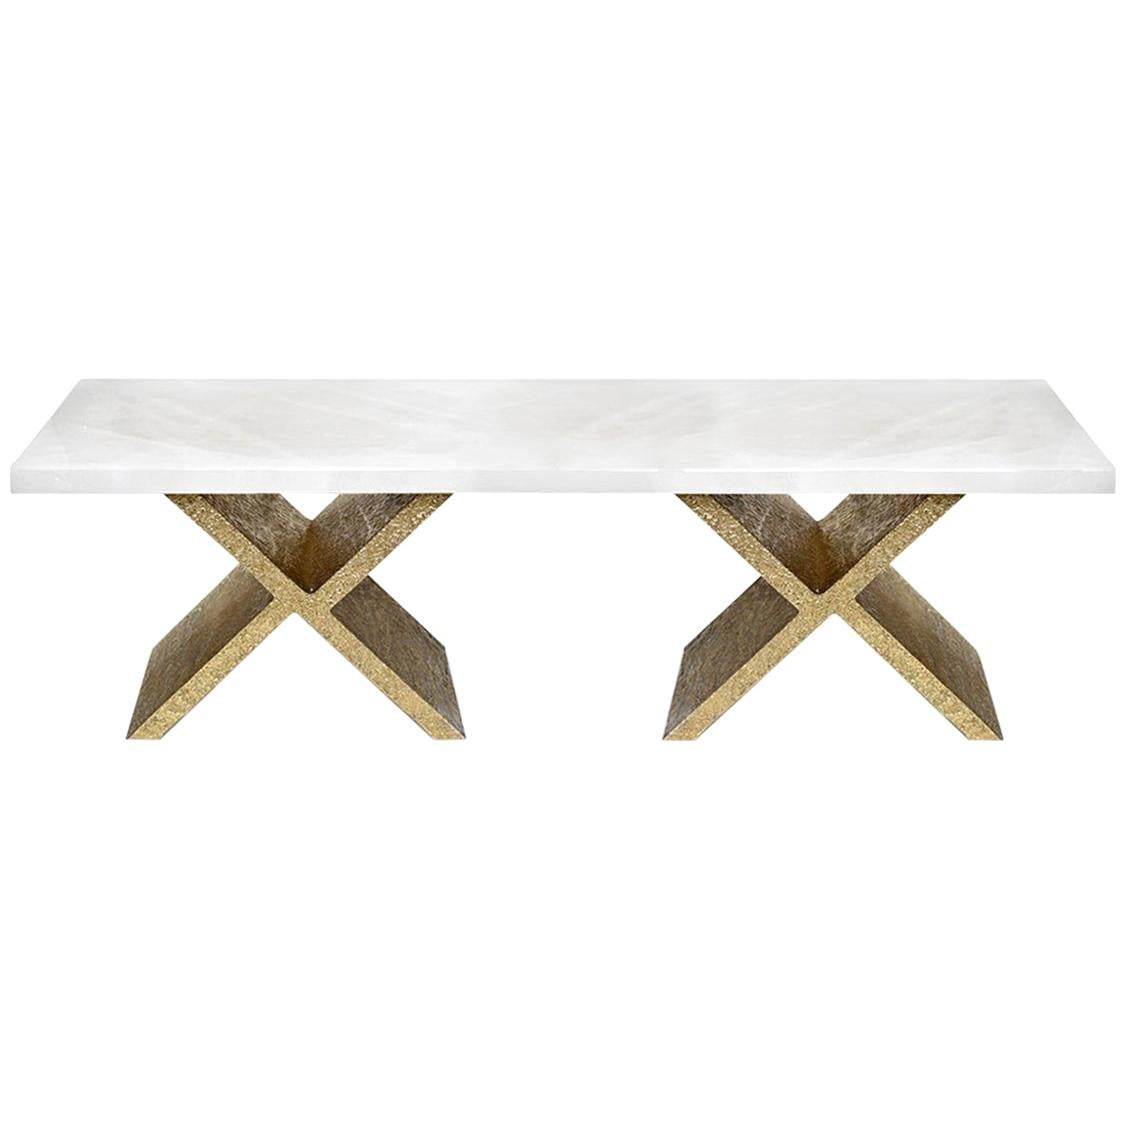 Double X Coffee Table by Phoenix For Sale